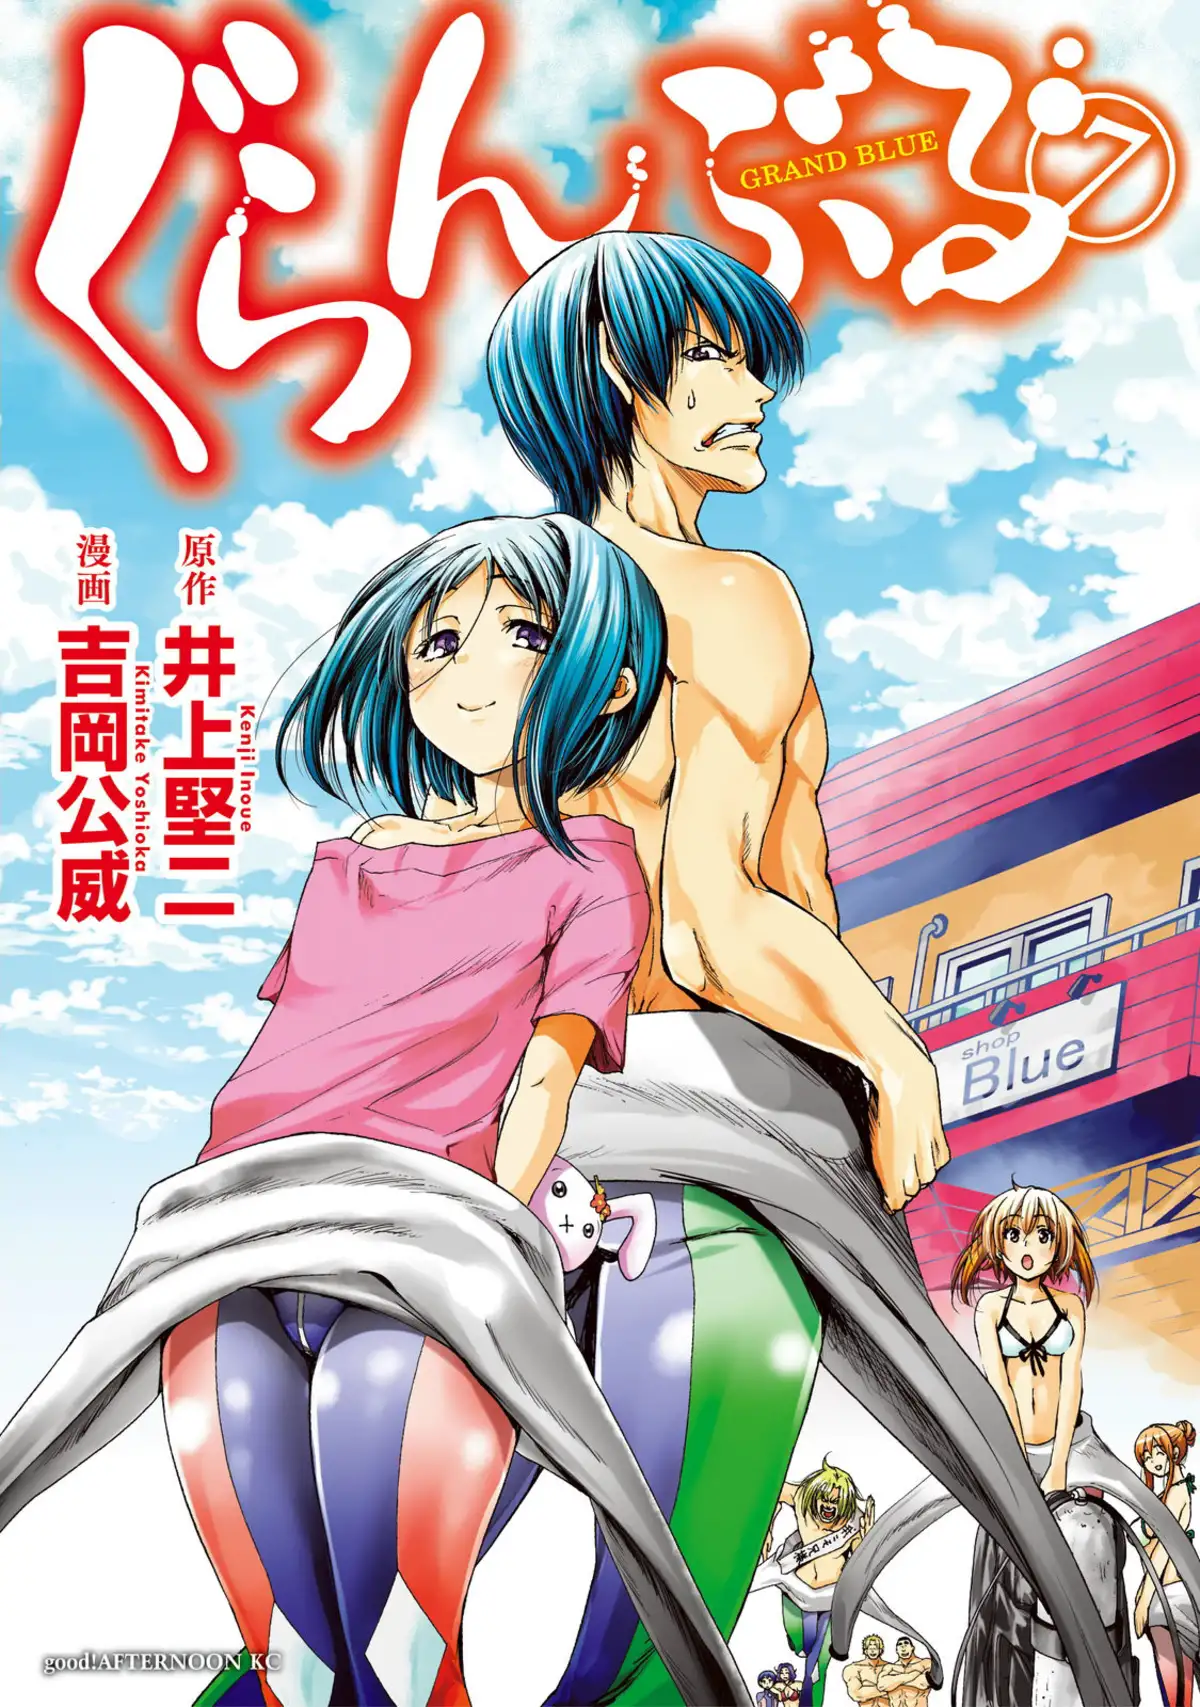 Grand Blue Volume 7 page 1